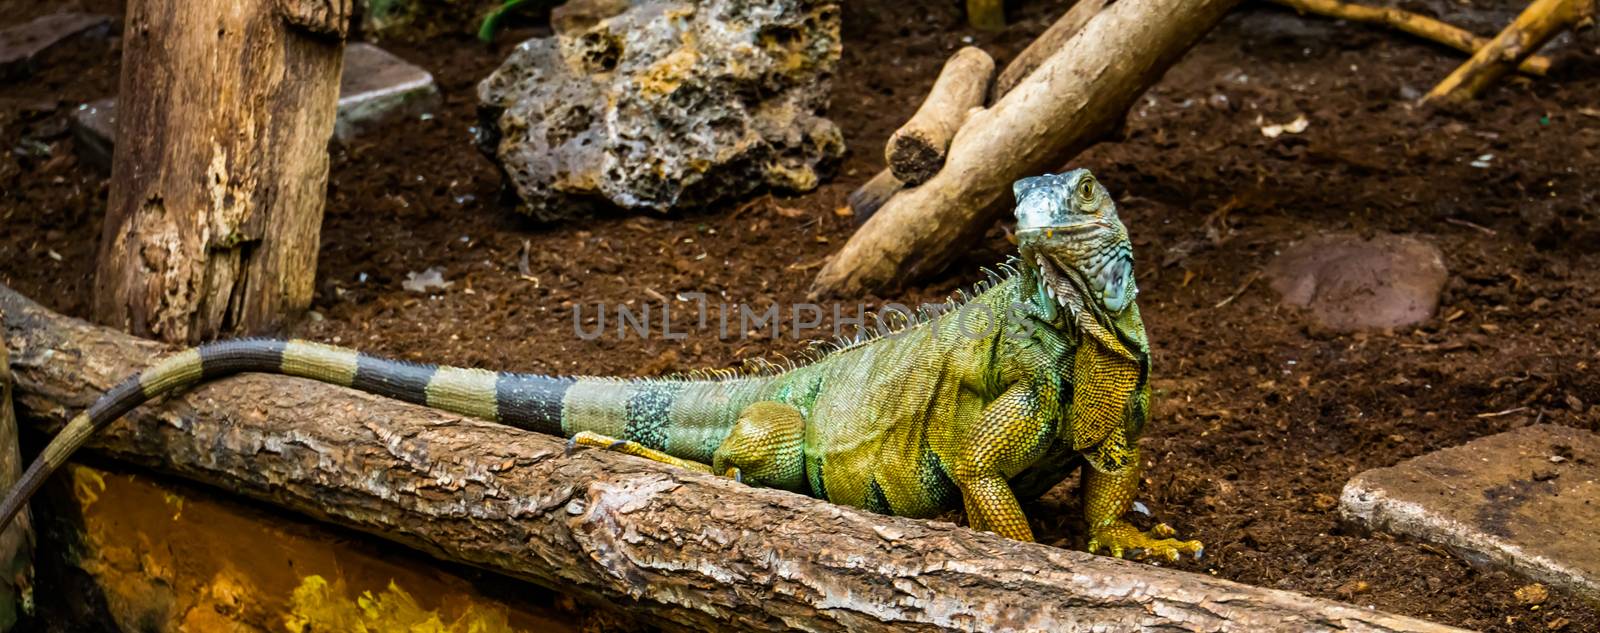 portrait of a green american iguana looking in the camera, popular tropical reptile specie from America by charlottebleijenberg